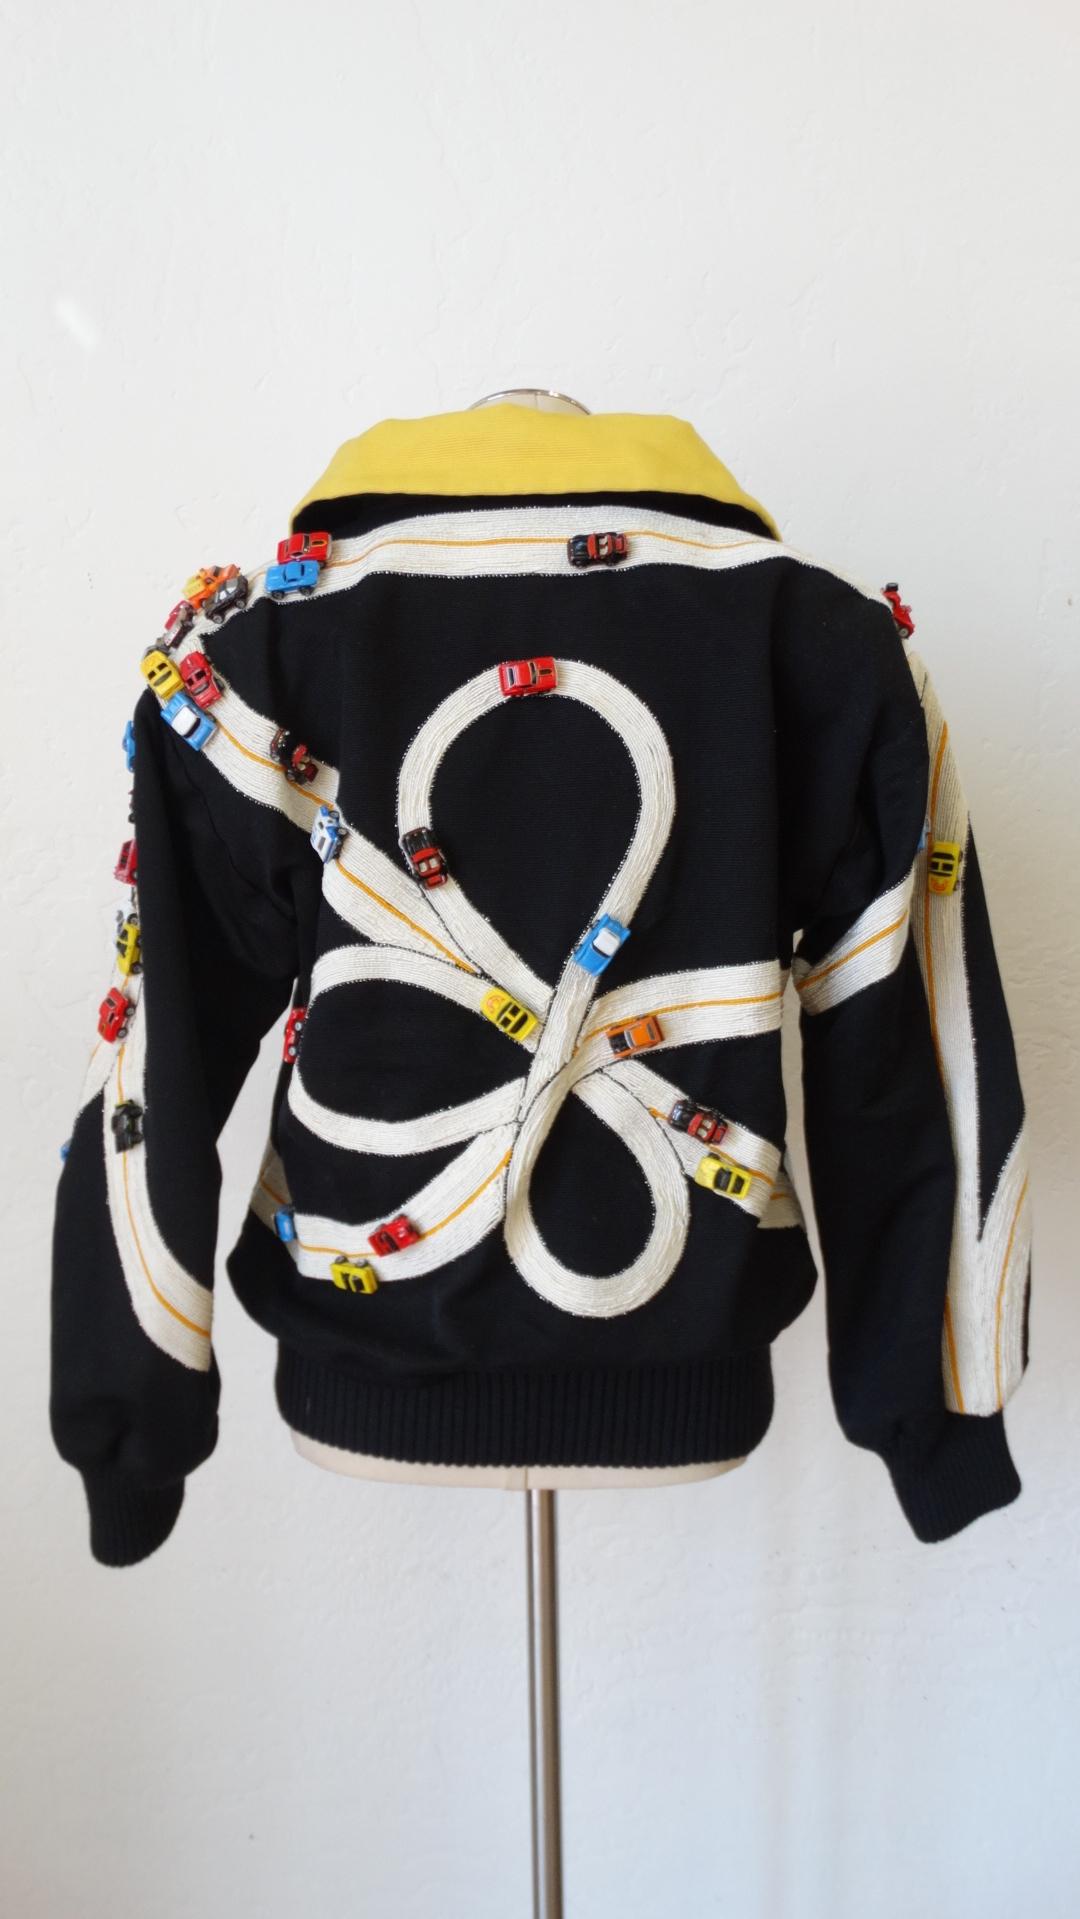 The Most Amazing Jacket Is here! Circa 1990s, this Bob Mackie oversized jacket features a winding street with a variety of miniature toy cars placed throughout. The sleeves and hem are ribbed cotton for a snug fit. The lining is a vibrant yellow and